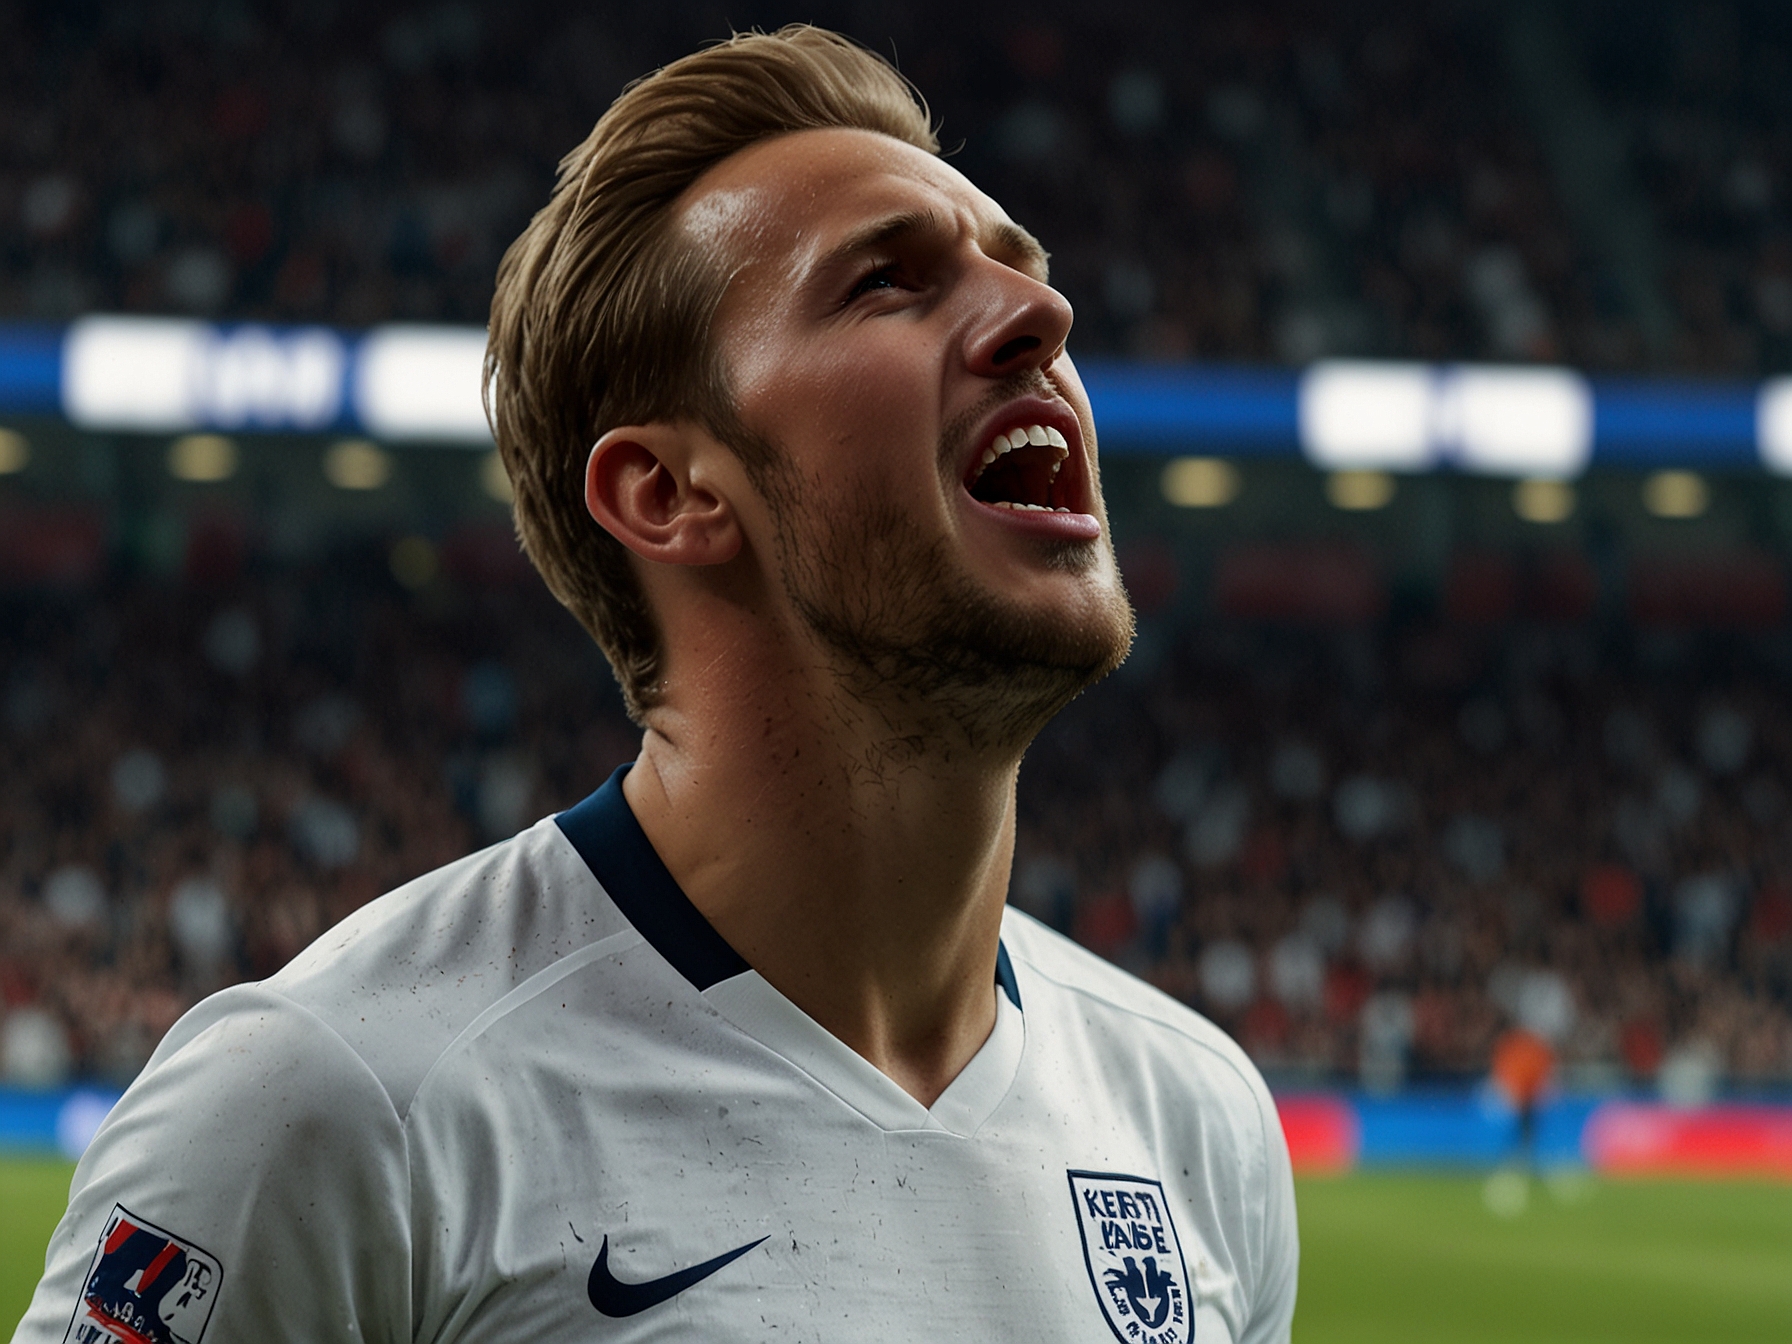 Harry Kane celebrates his early goal against Denmark in Frankfurt, a moment of promise before England's struggles with possession and defense became evident in the match.